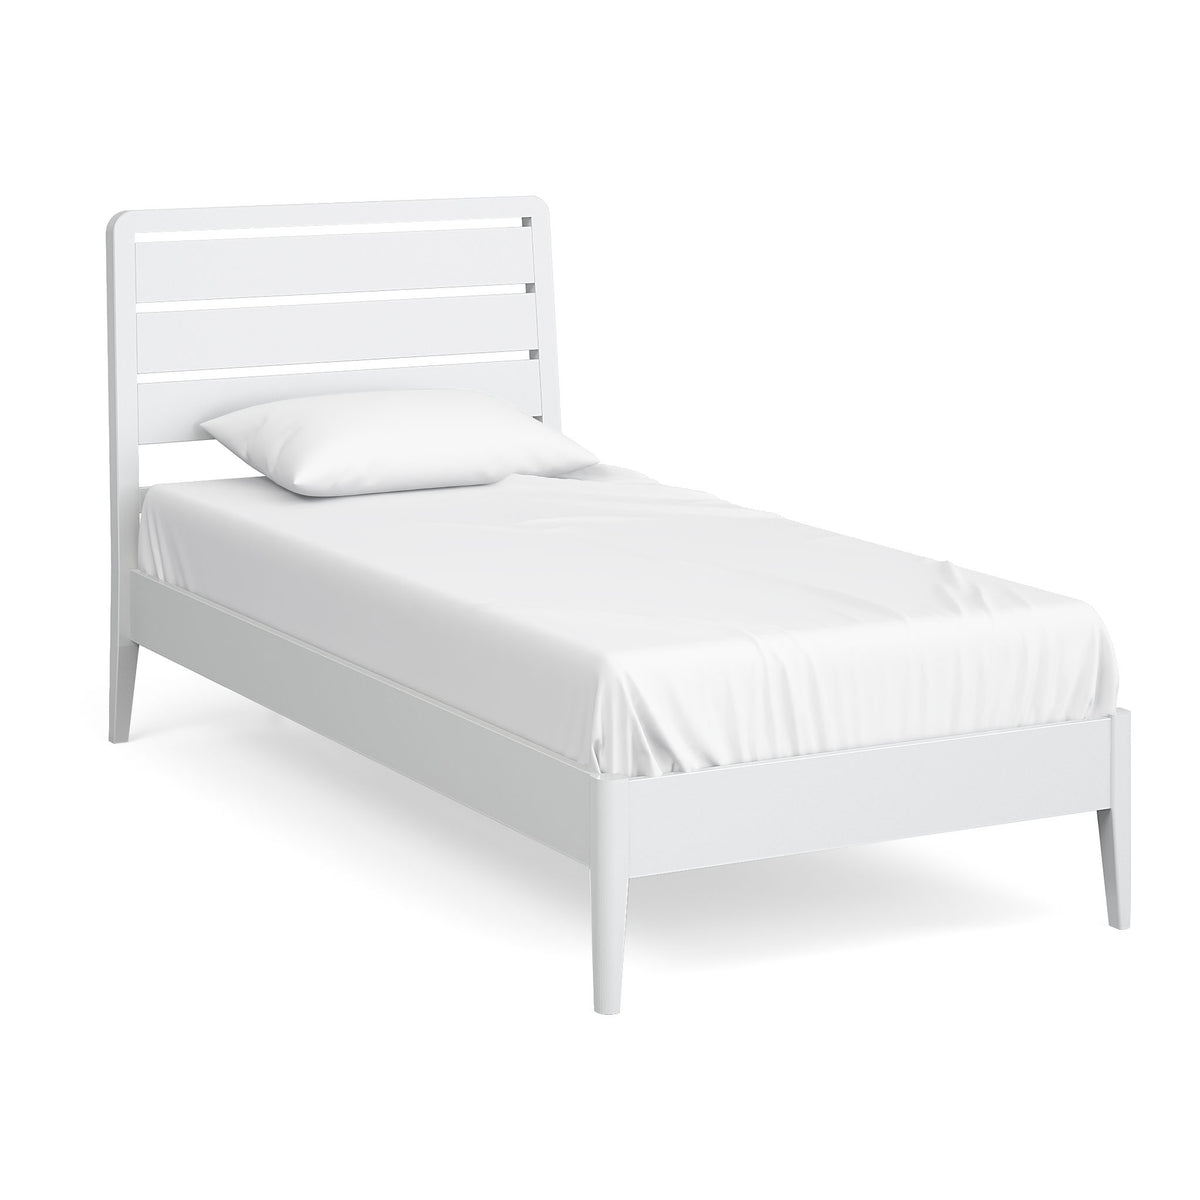 Chest White Painted 3ft Single Bed Frame from Roseland Furniture